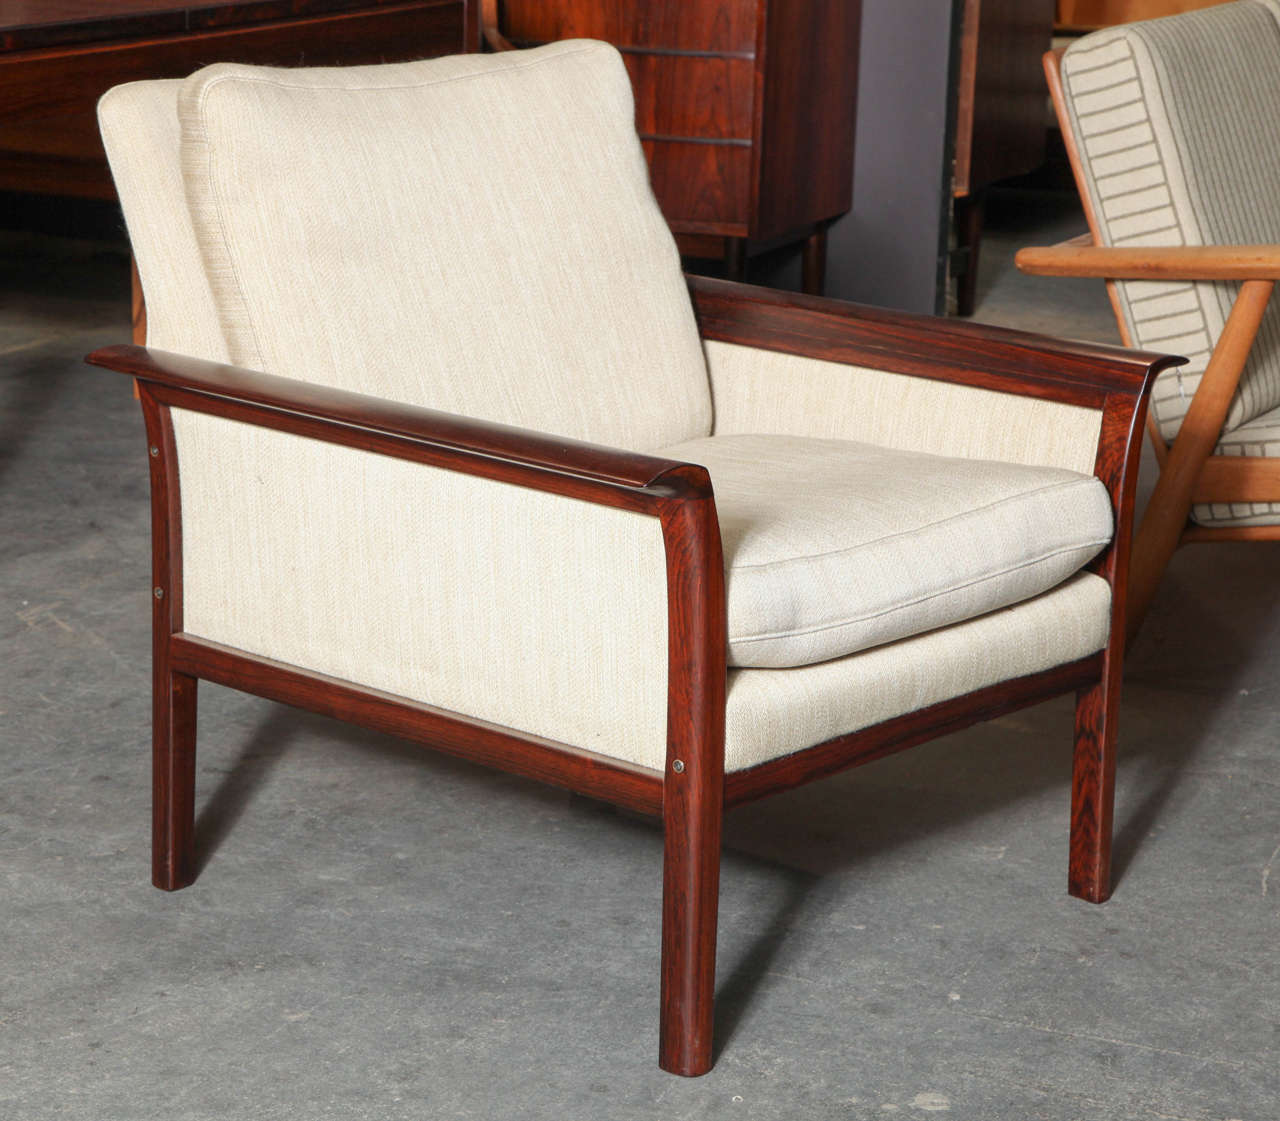 Mid-20th Century Contemporary Armchairs by Knut Saeter from Norway